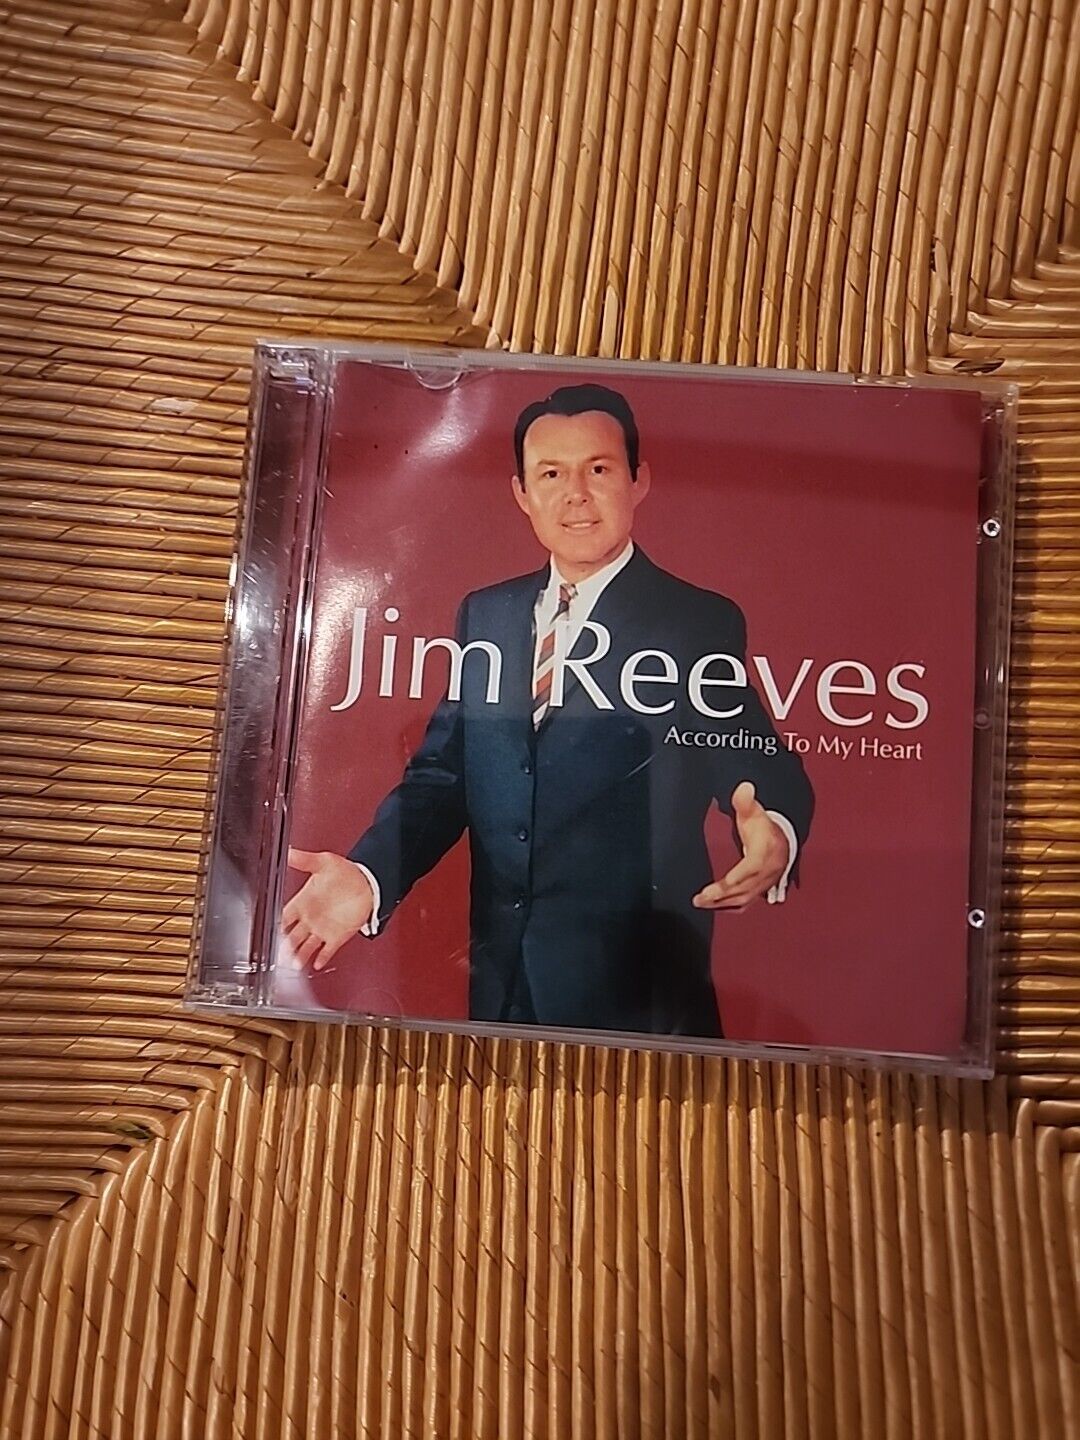 According to My Heart [RCA Victor] by Jim Reeves (CD, Jan-2004, Newsound 2000)